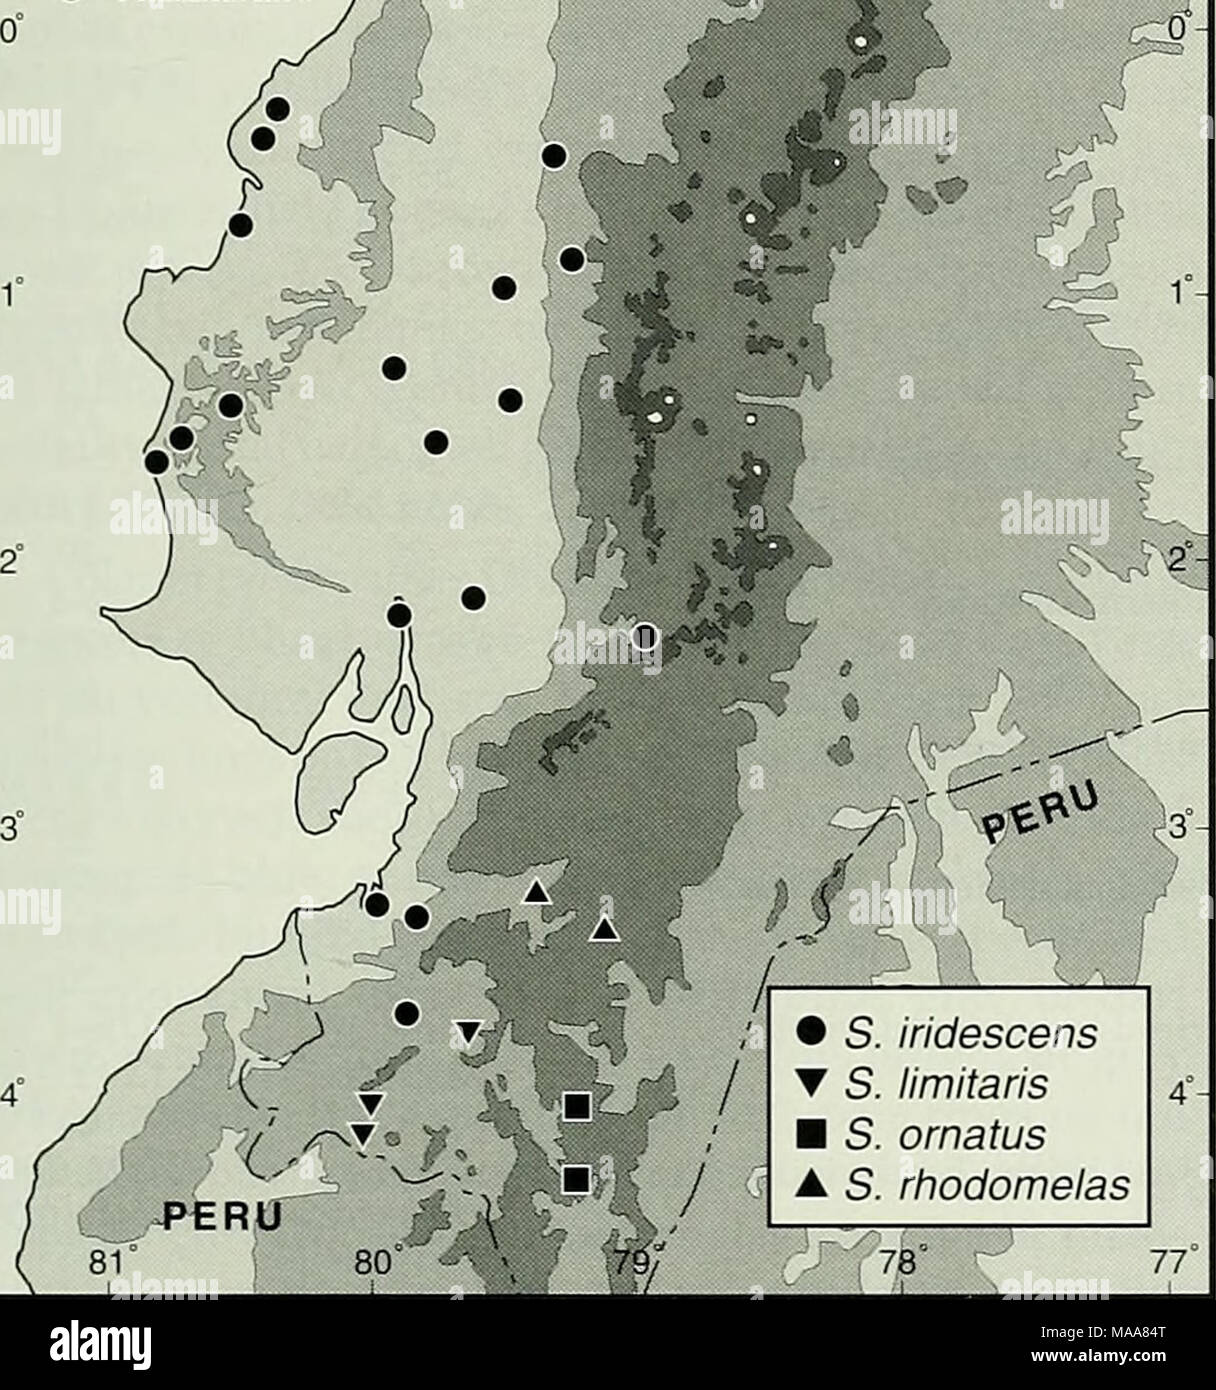 . Ecuadorian lizards of the genus Stenocercus (Squamata: Tropiduridae) . 1 â¢ S. Ihdescens 1 â¼ S. limitahs â S. ornatus A S. rhodomelas 77 l  Fig. 16. Distribution of four species of Stenocercus in Ecuador. Forest, and Very Humid Premontane Forest life zones. The mean annual temperature is 24-26 Â°C in the former two life zones, 24-25 Â°C in the third and 18-24Â°C in the latter two. The mean annual precipitation is 125-250 mm in the first one, 500-1000 mm in the second one, 1000-2000 mm in the third and fourth ones, and 2000^000 mm in the lat- ter one. This species also occurs in northwestern Stock Photo